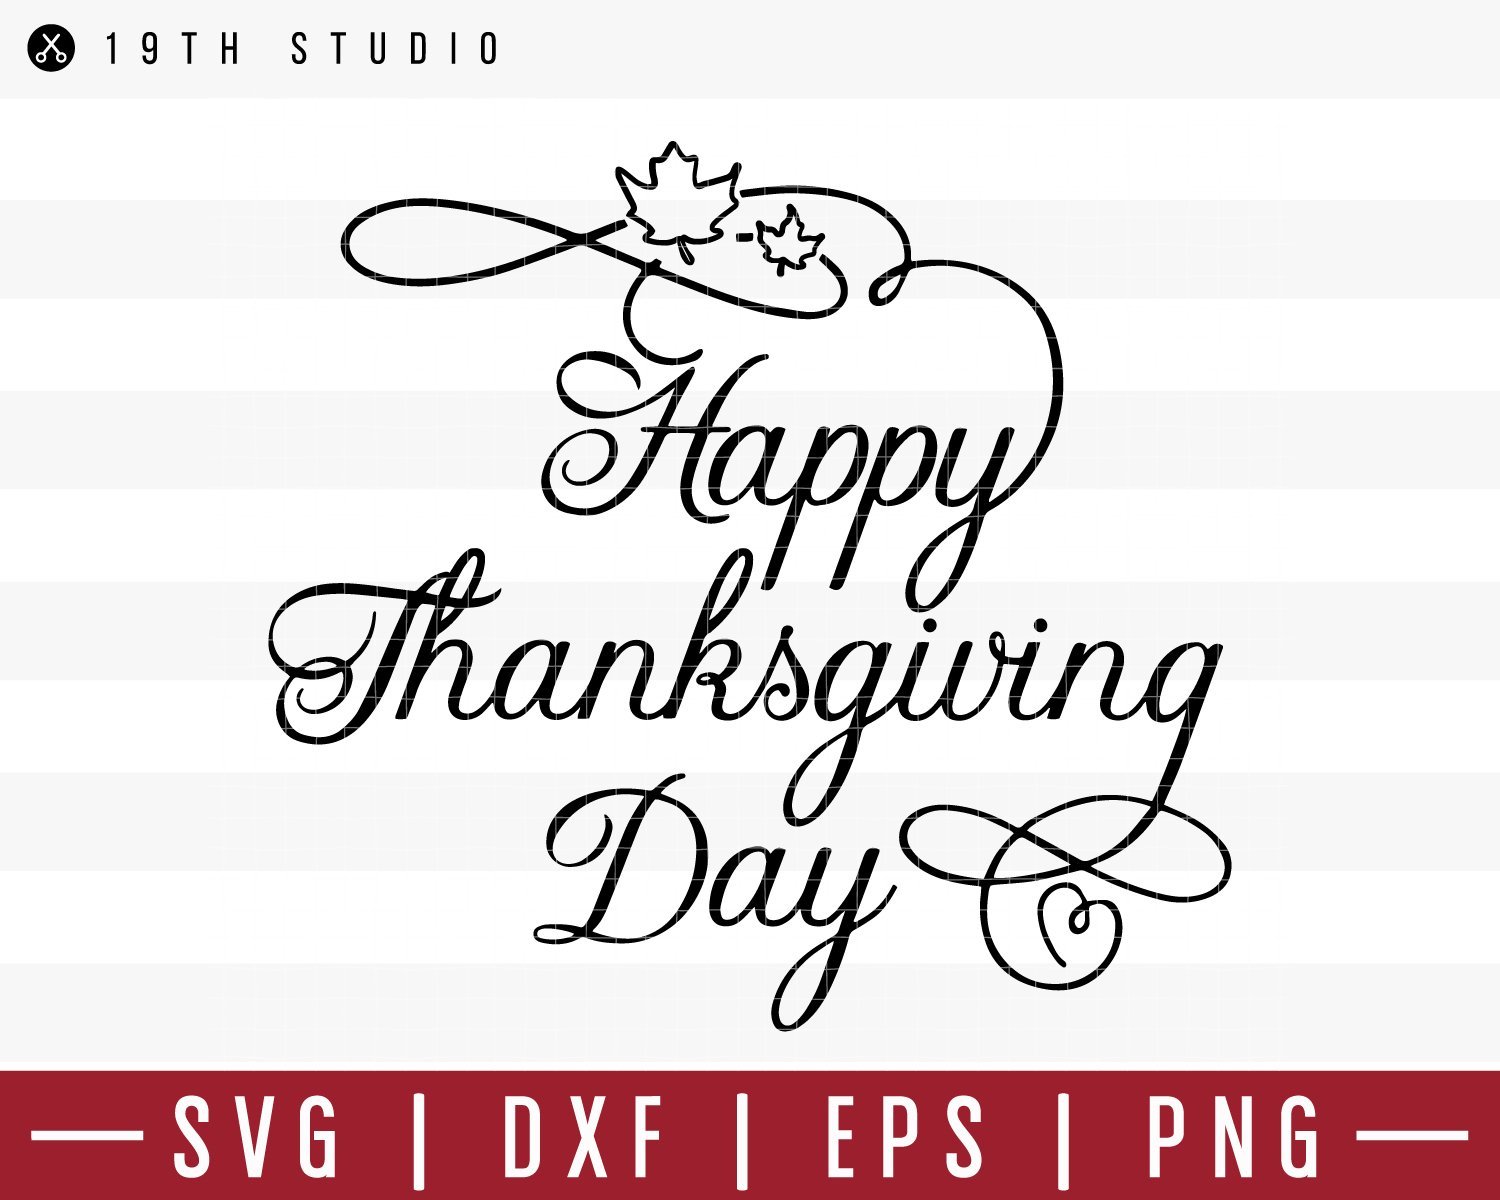 Happy Thanksgiving day SVG | M39F10 Craft House SVG - SVG files for Cricut and Silhouette